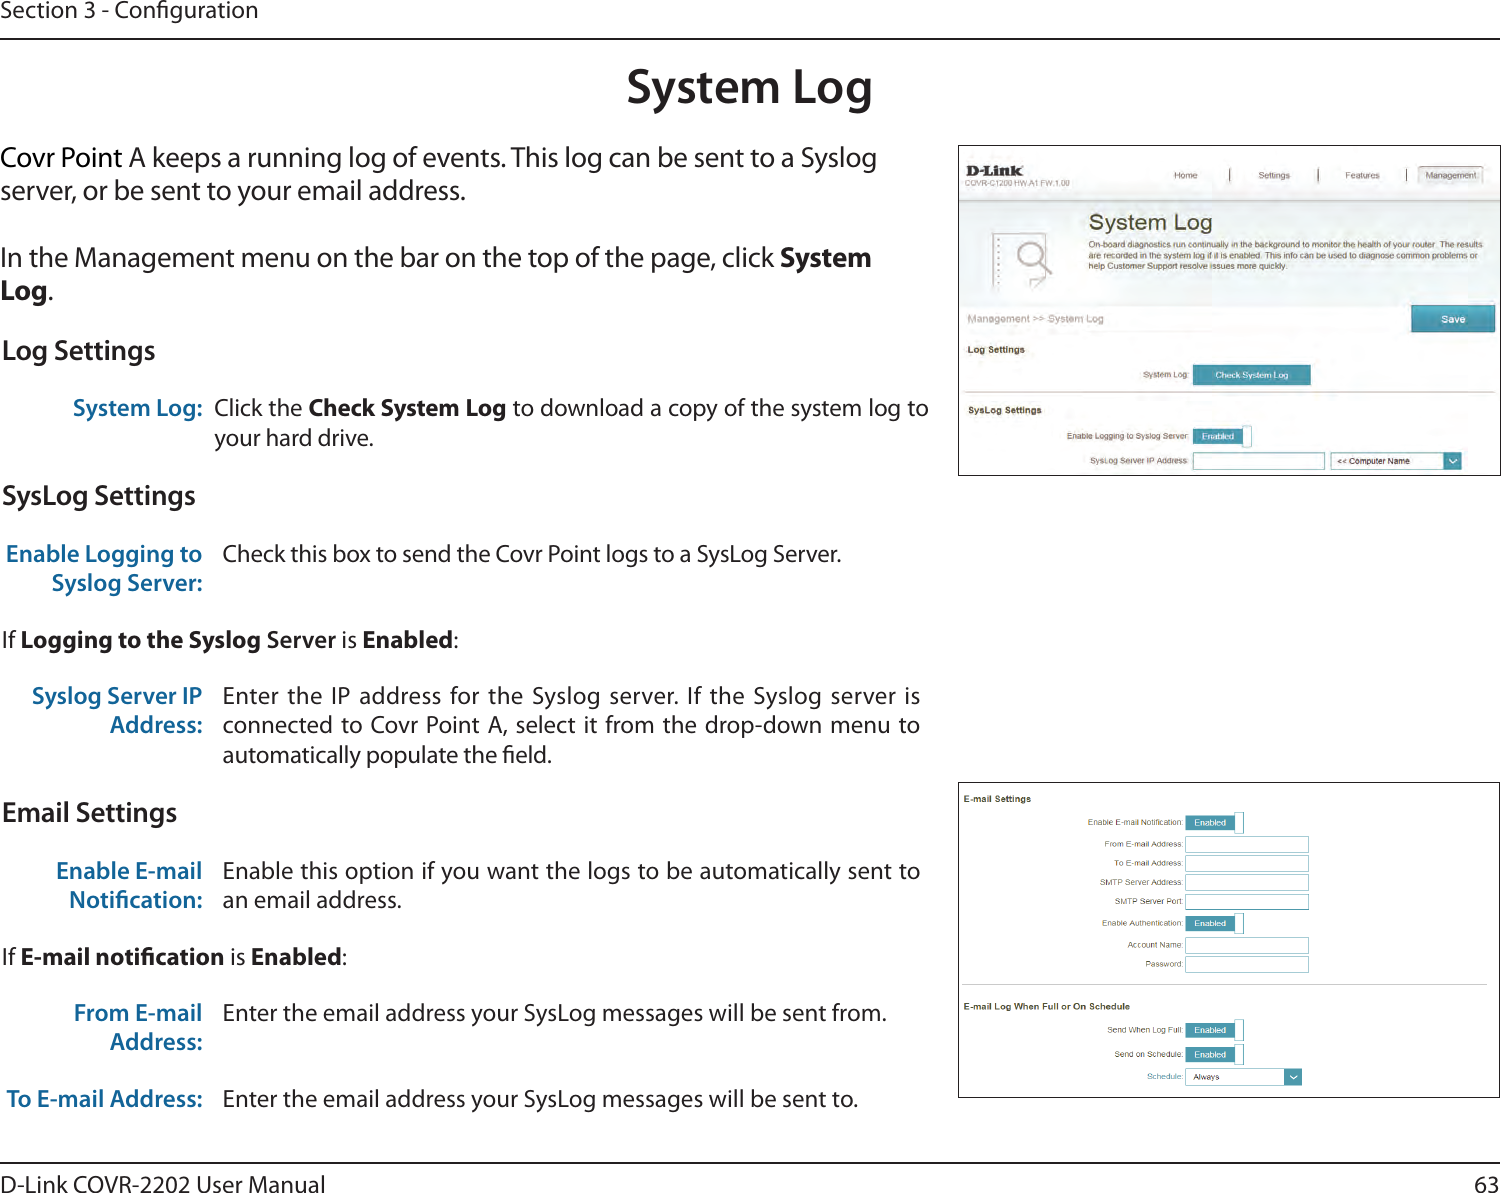 63D-Link COVR-2202 User ManualSection 3 - CongurationSystem LogCovr Point A keeps a running log of events. This log can be sent to a Syslog server, or be sent to your email address. In the Management menu on the bar on the top of the page, click System Log. Log SettingsSystem Log: Click the Check System Log to download a copy of the system log to your hard drive.SysLog SettingsEnable Logging to Syslog Server:Check this box to send the Covr Point logs to a SysLog Server. If Logging to the Syslog Server is Enabled:Syslog Server IP Address:Enter the IP address for the Syslog server. If the Syslog server is connected to Covr Point A, select it from the drop-down menu to automatically populate the eld. Email SettingsEnable E-mail Notication:Enable this option if you want the logs to be automatically sent to an email address.If E-mail notication is Enabled:From E-mail Address:Enter the email address your SysLog messages will be sent from.To E-mail Address: Enter the email address your SysLog messages will be sent to.